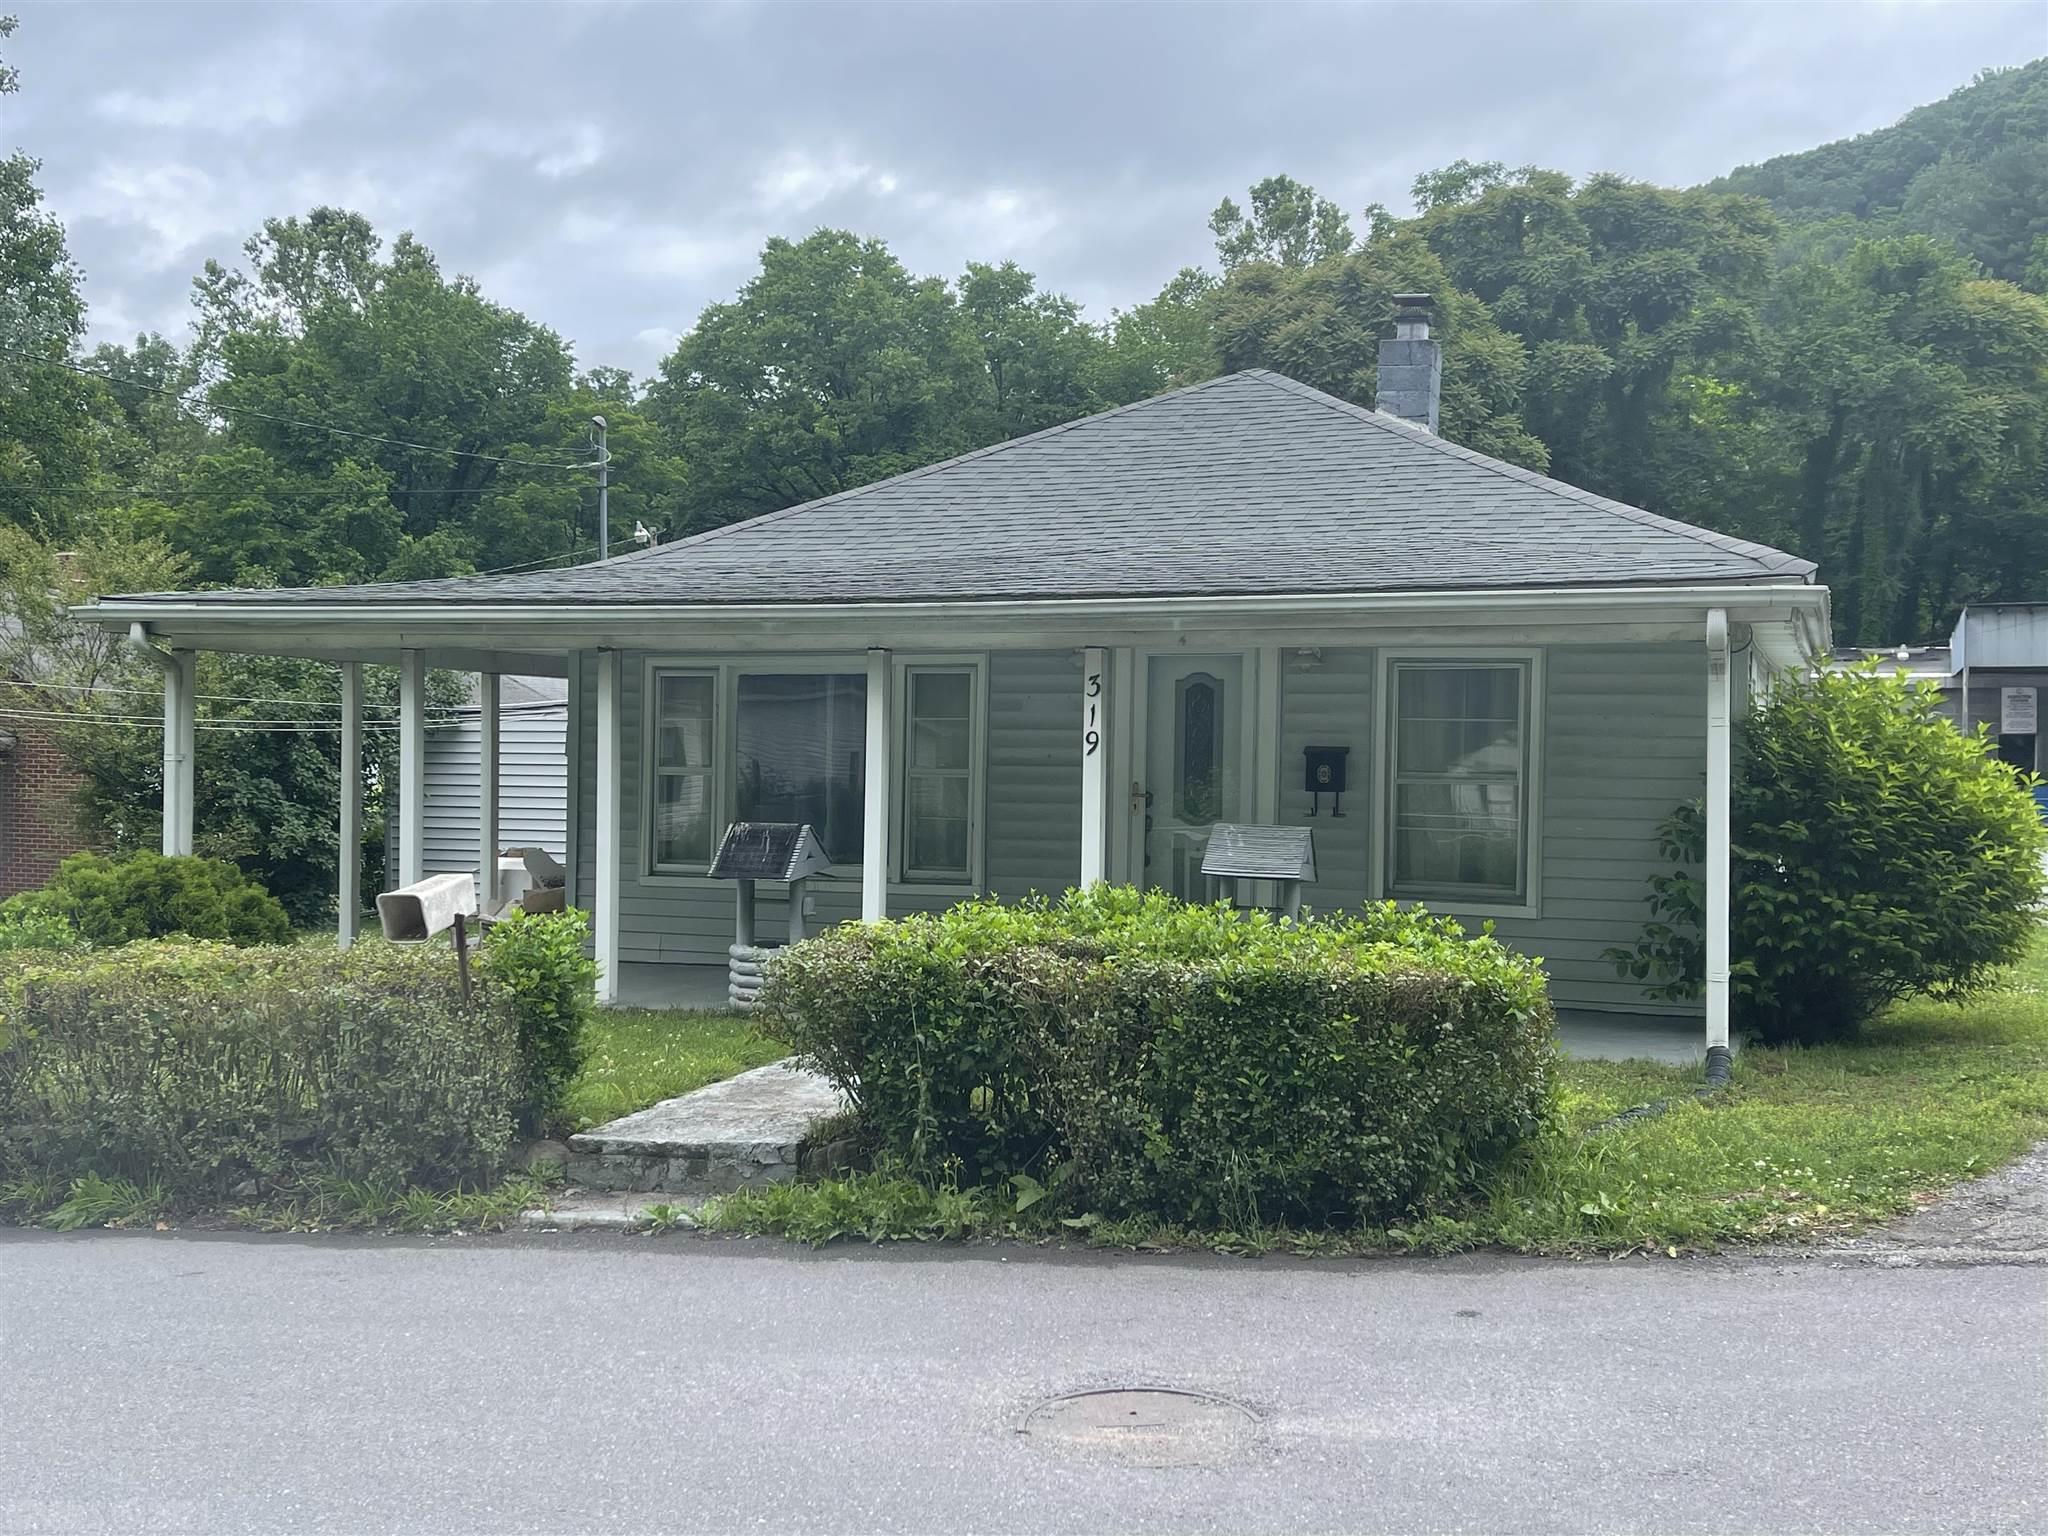 Older home with lots of possibilities, 2br,2ba, carport, beautiful hard wood floors, small screen porch, work shop for your handyman! Call today!